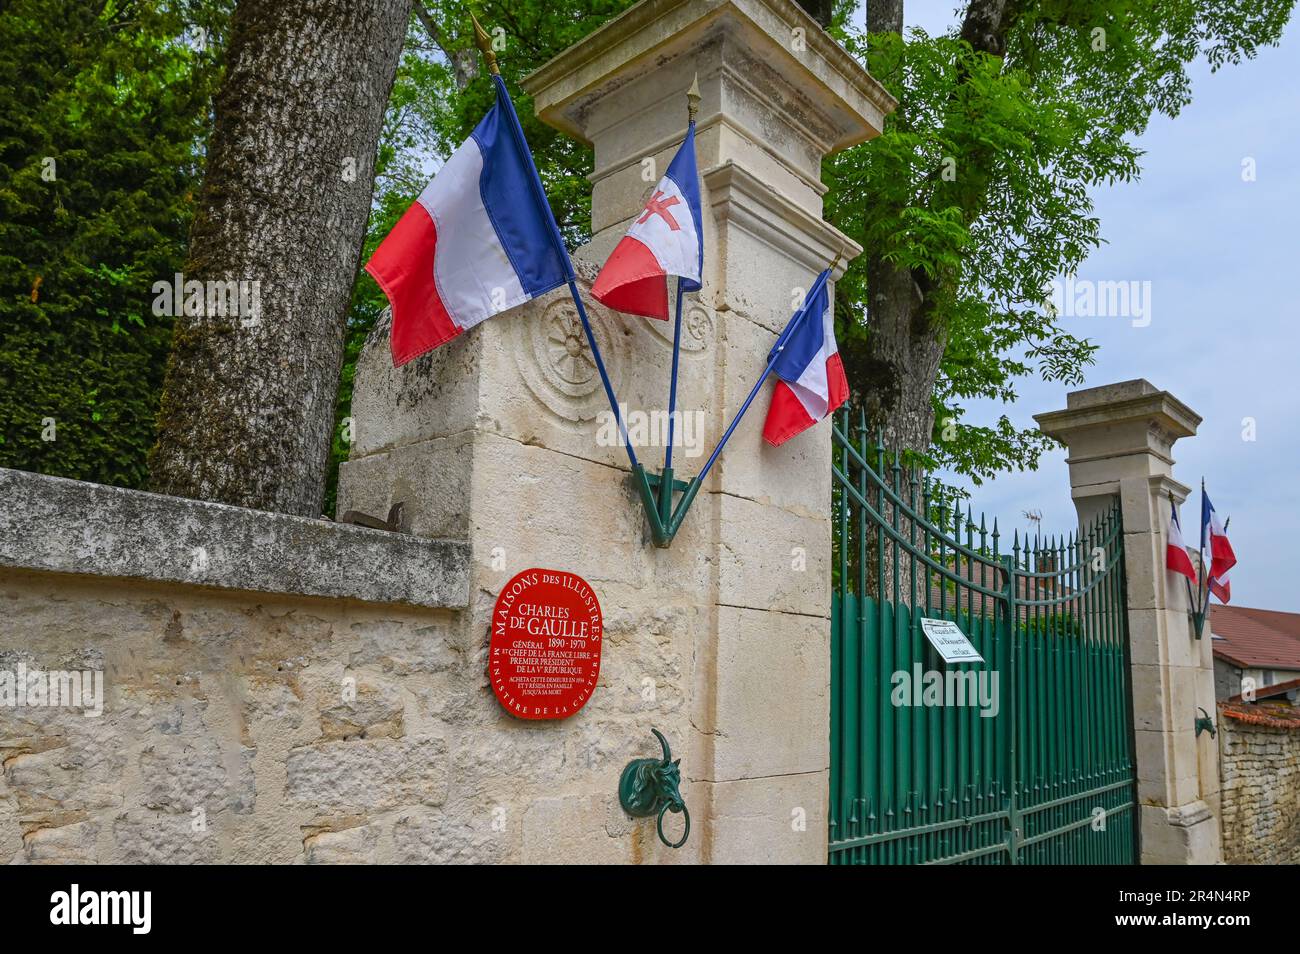 La Boisserie: the entrance to the private property of Charles de Gaulle in Colombey-les-deux-églises, France Stock Photo